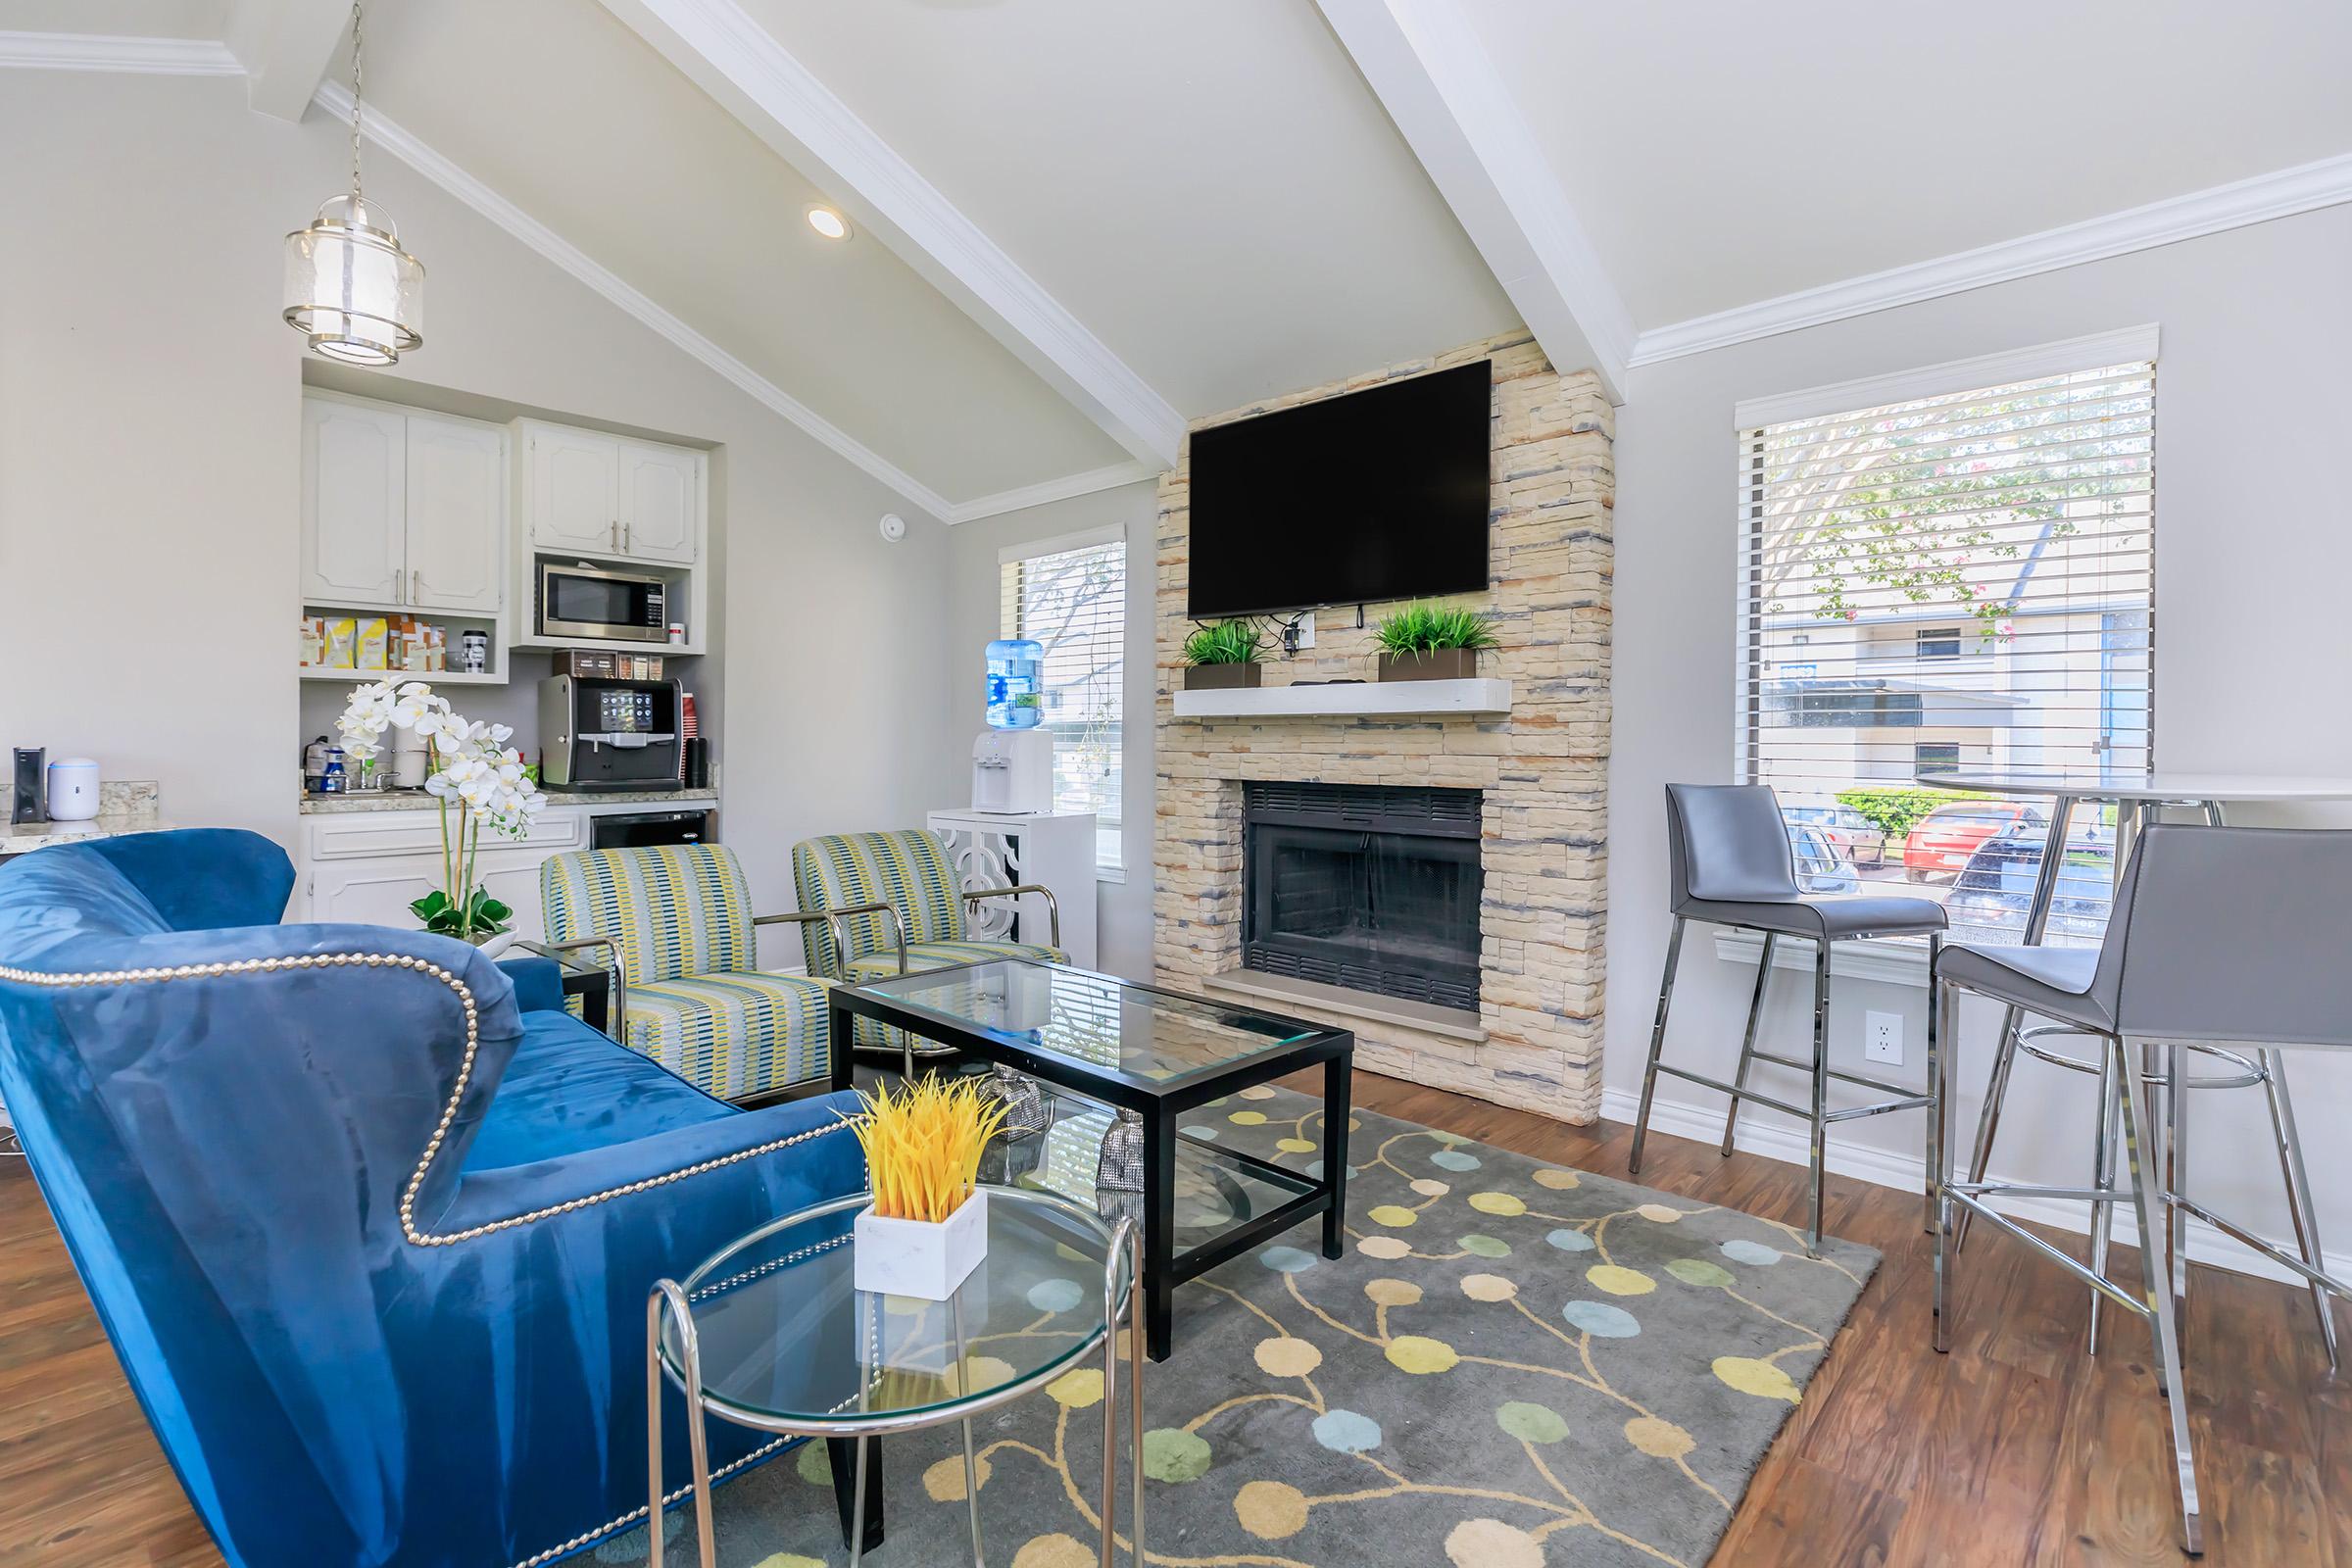 A living space at the clubhouse at Rise Oak Creek with furniture and a kitchen.